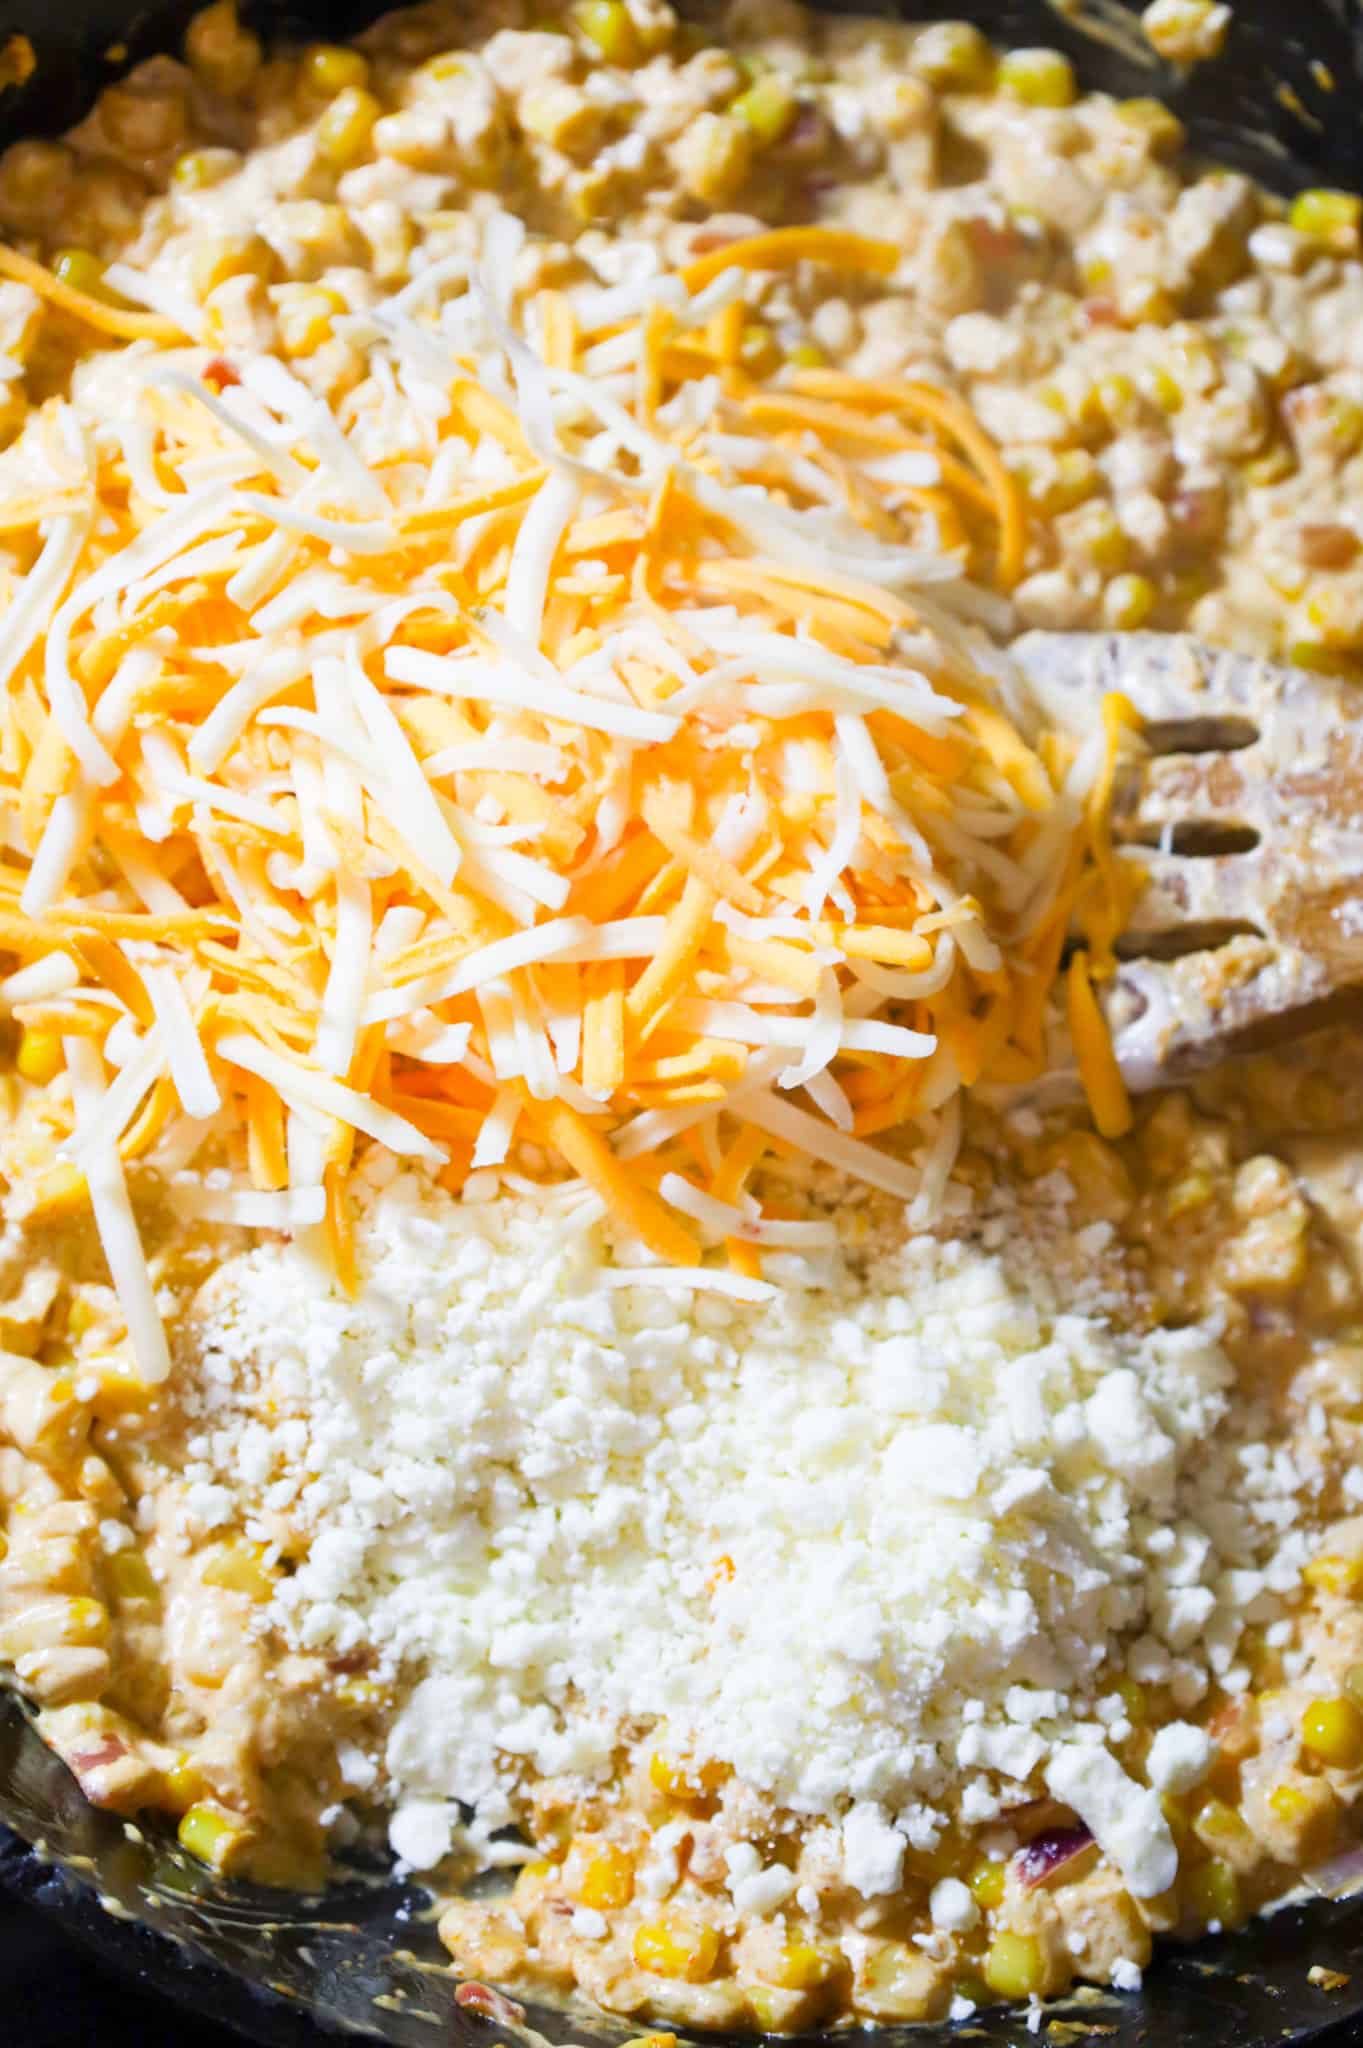 shredded cheese and crumbled feta on top of cream cheese and corn mixture in a skillet